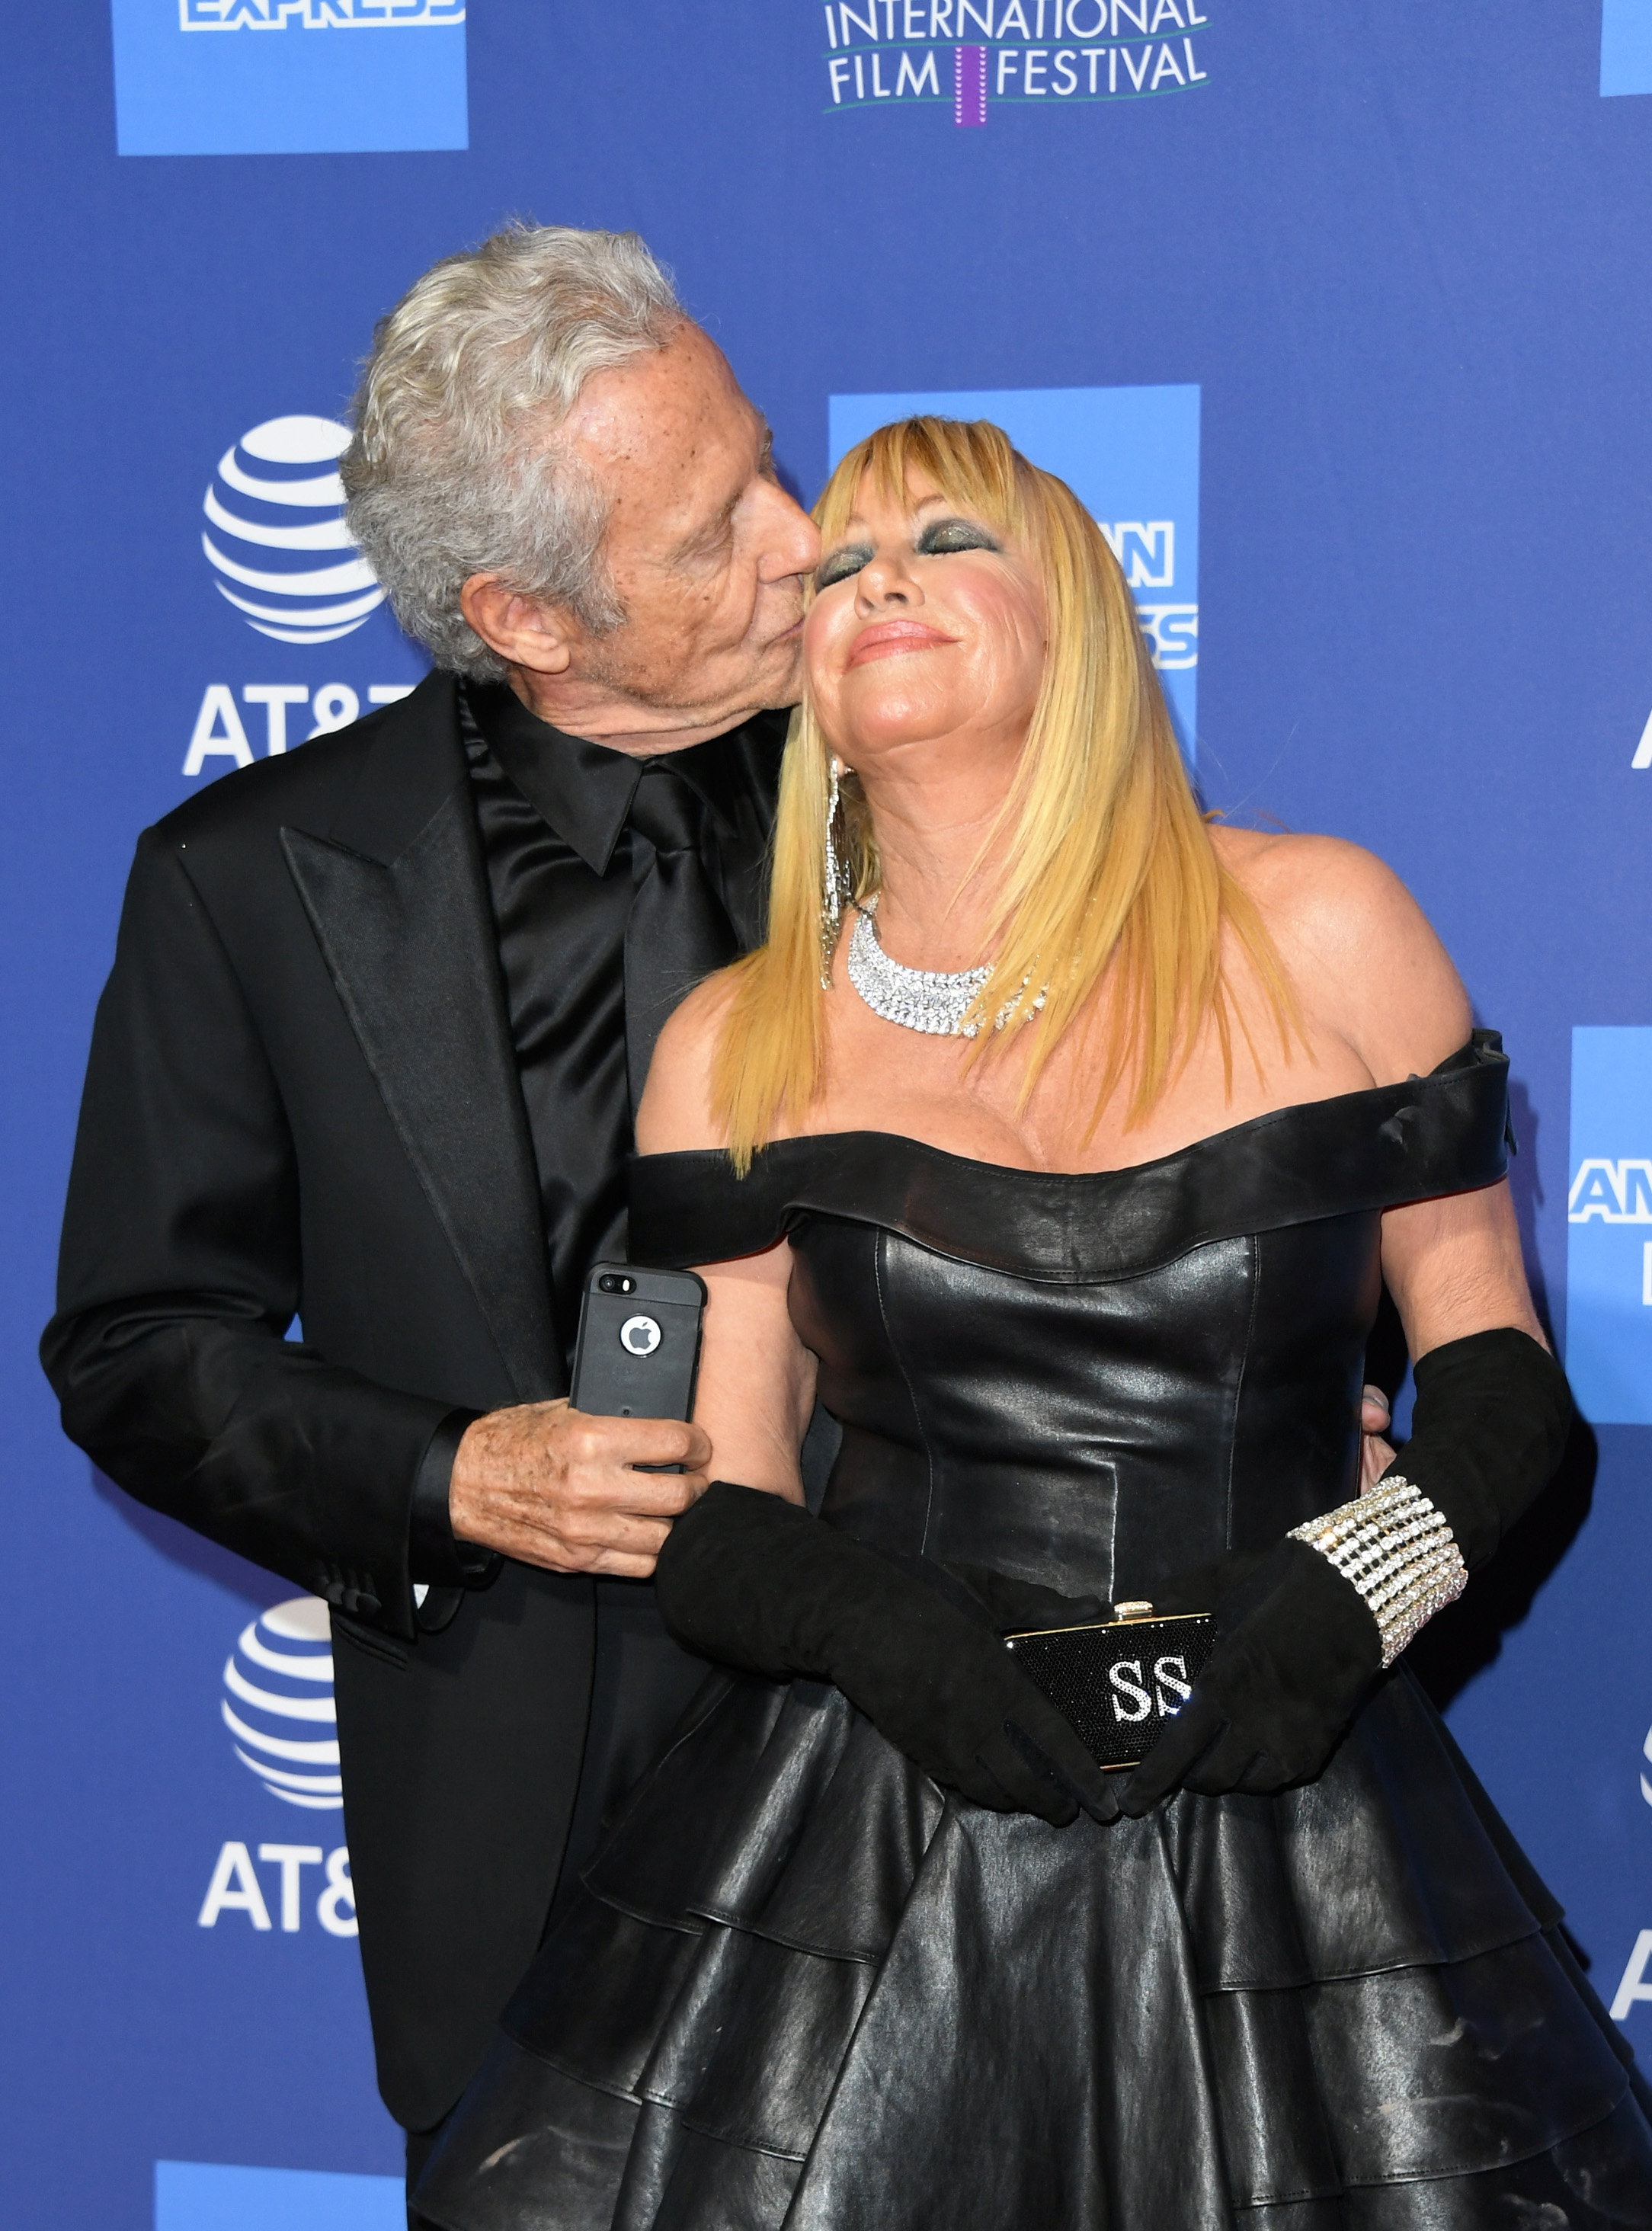 Alan Hamel and Suzanne Somers at the 30th Annual Palm Springs International Film Festival Film Awards Gala in Palm Springs, California on January 3, 2019 | Source: Getty Images 4860